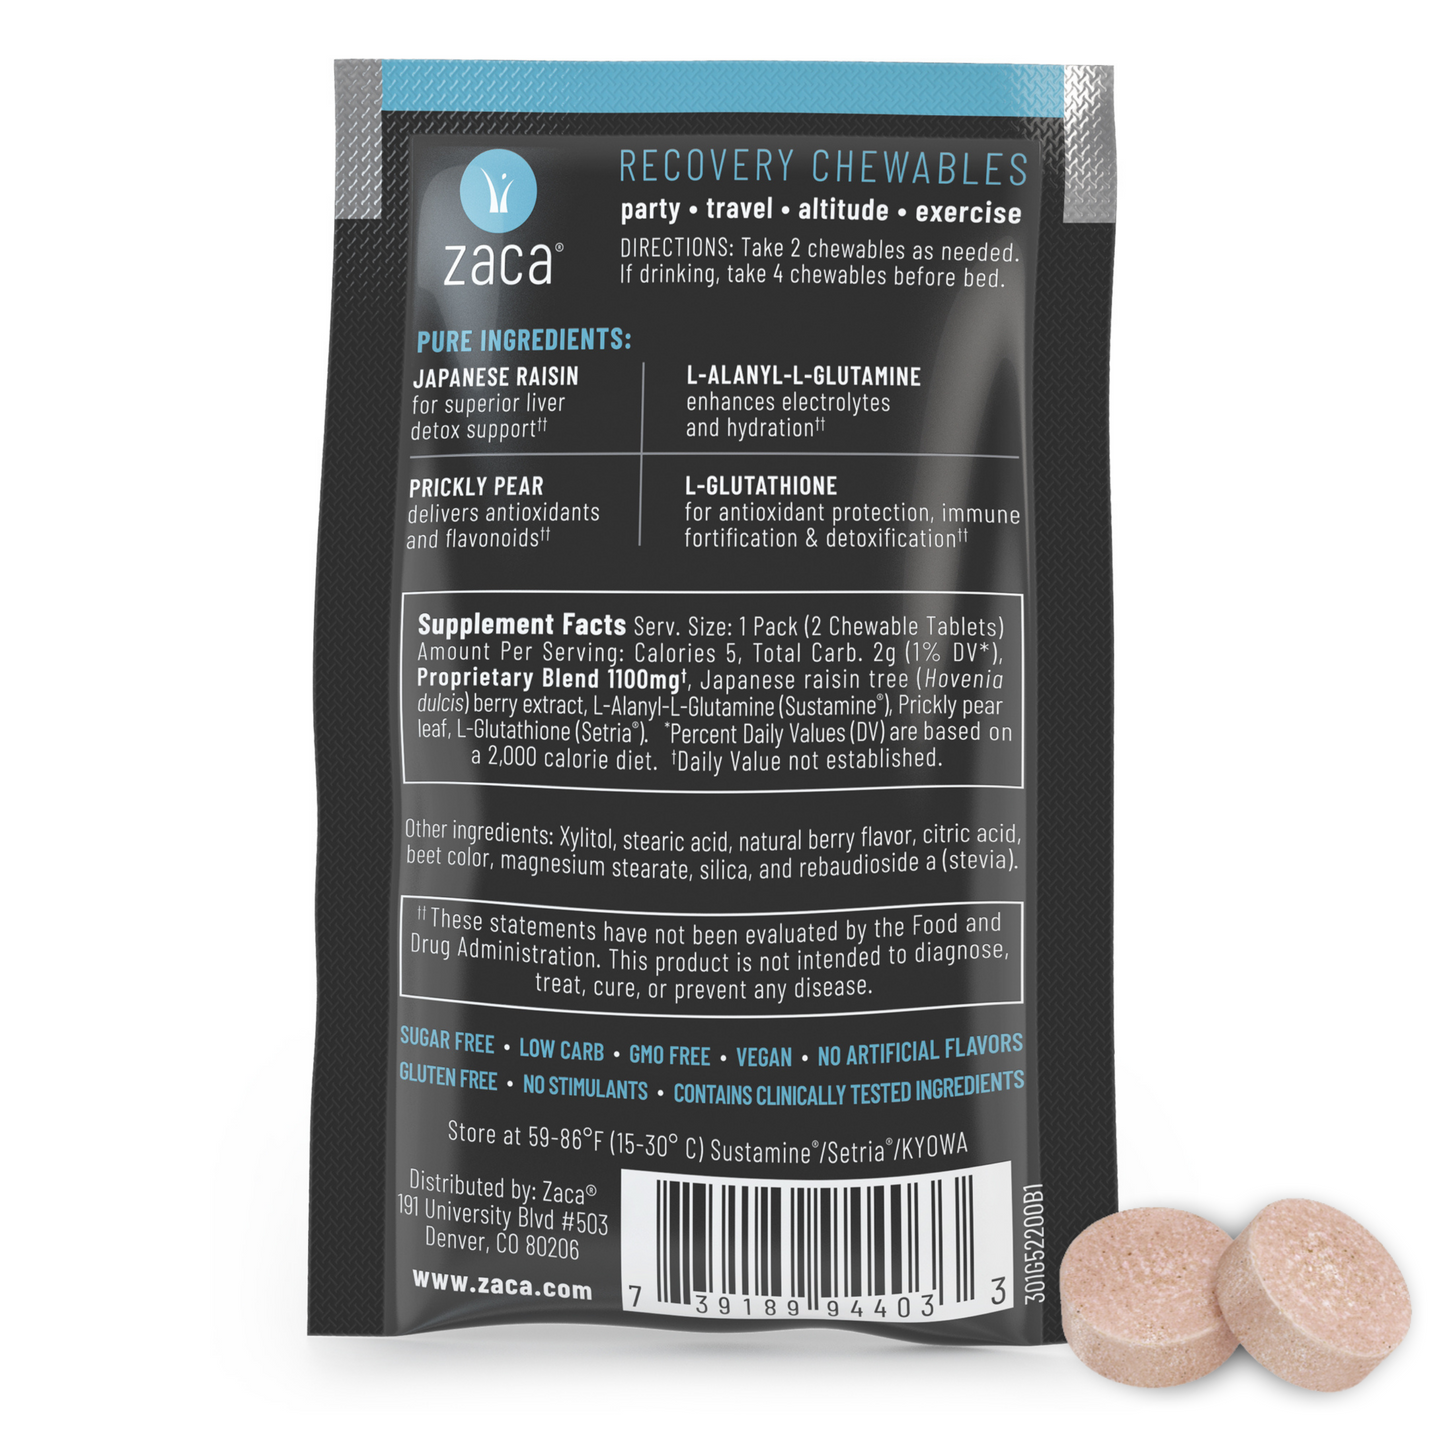 Recovery Chewable by Zaca